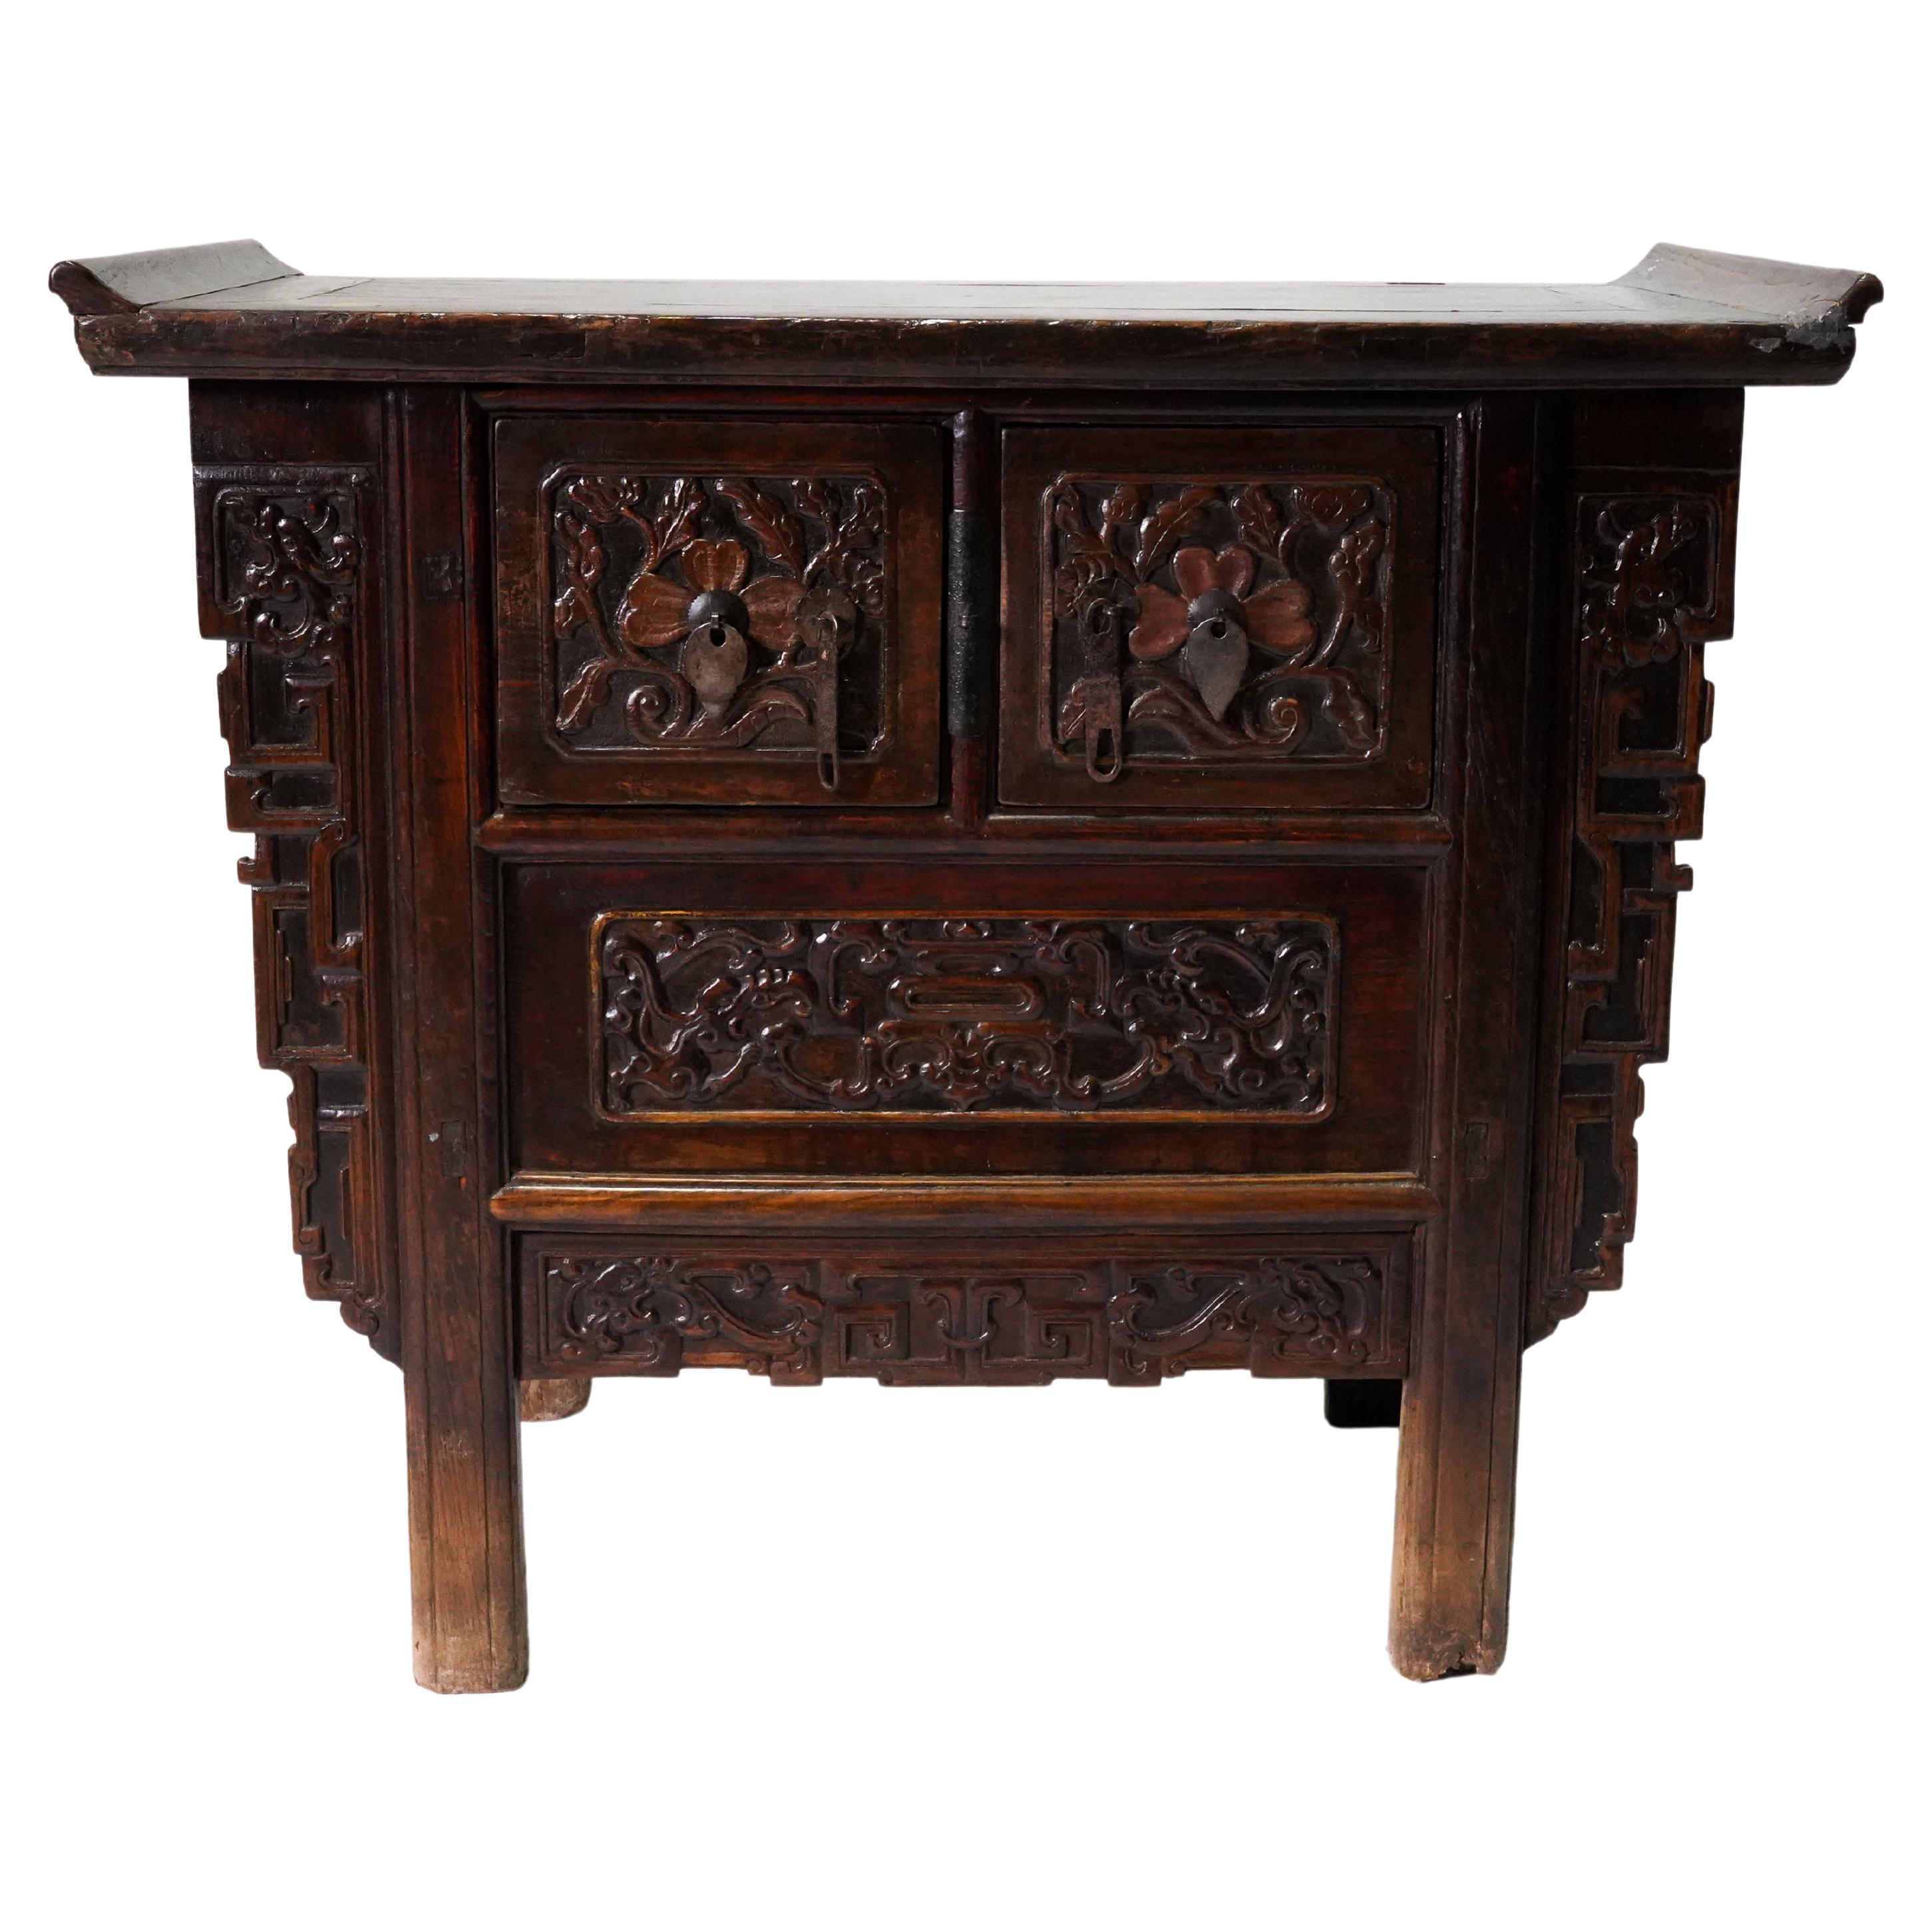 Rare C. 1850 Qing Storage Cabinet with Carved Dragon Spandrels